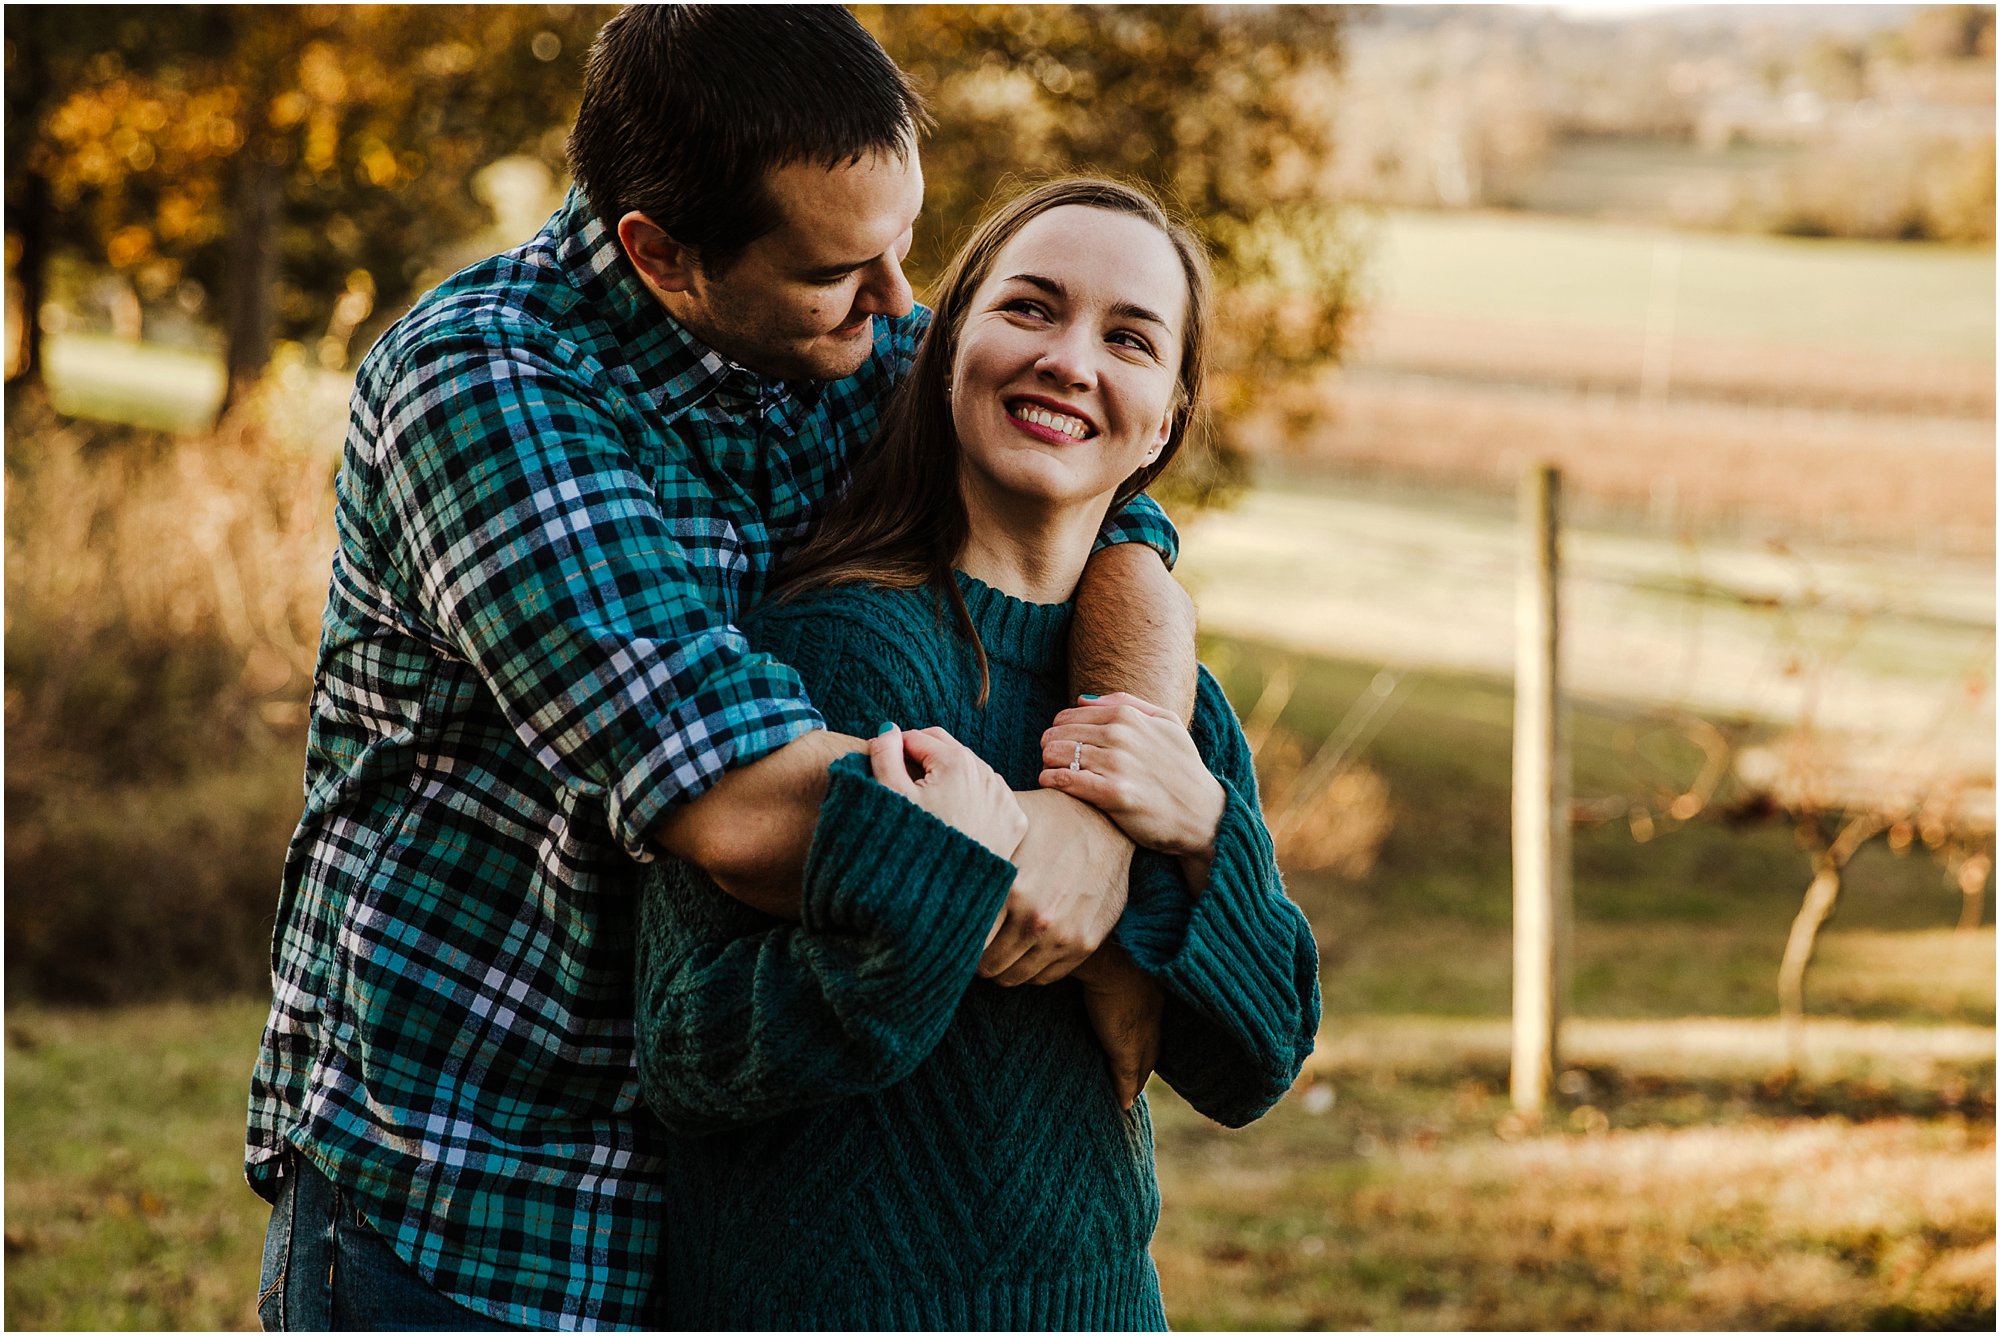 Guy bear hugging his girl as they smile on a hillside.